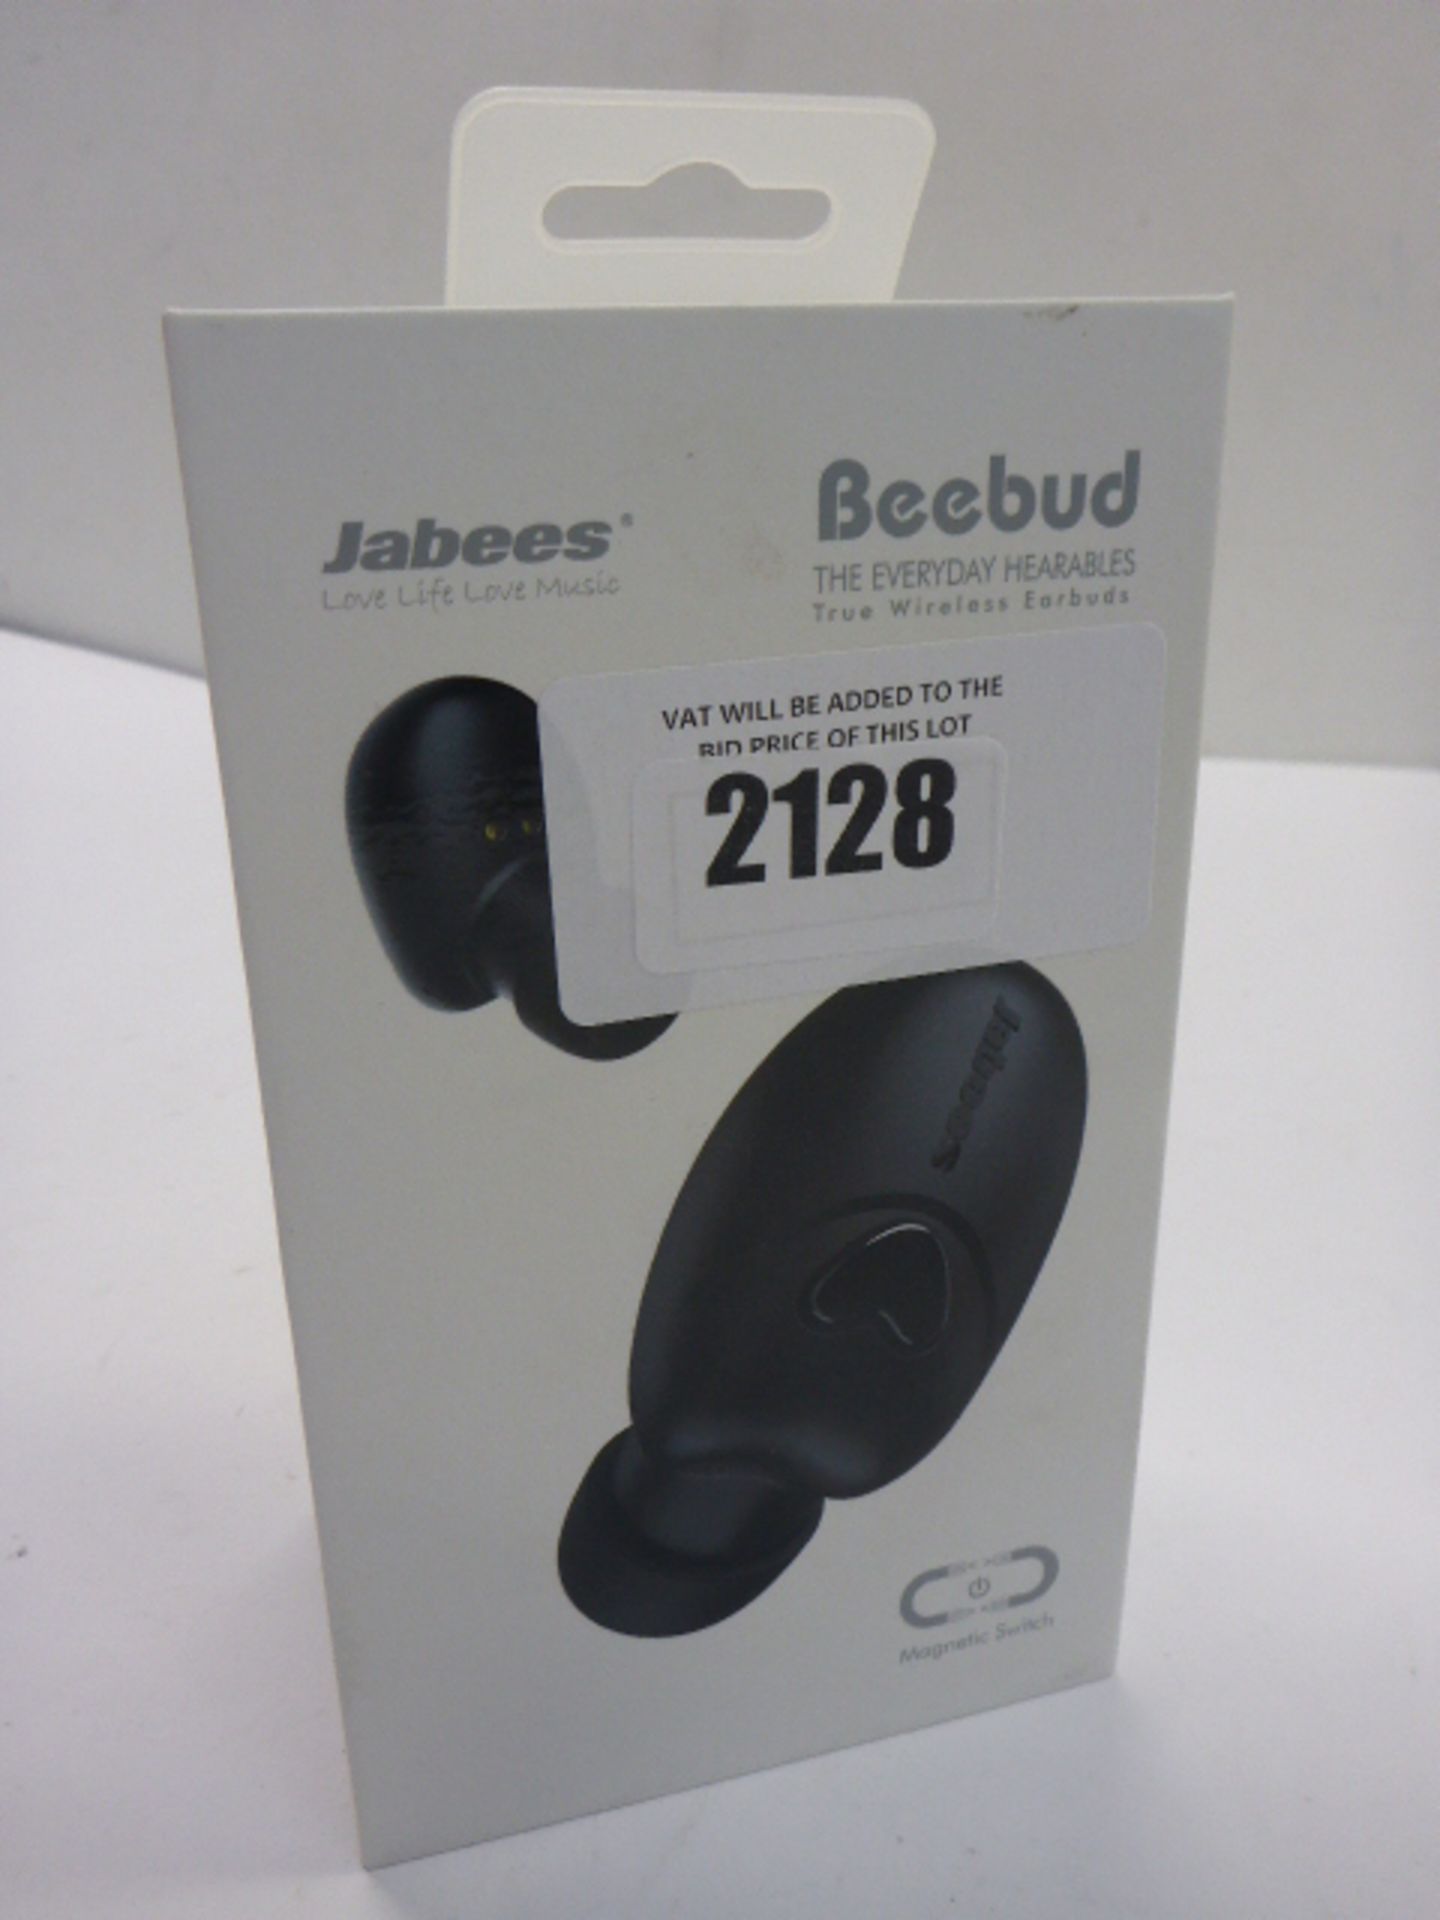 Jabees Beebud wireless earbuds